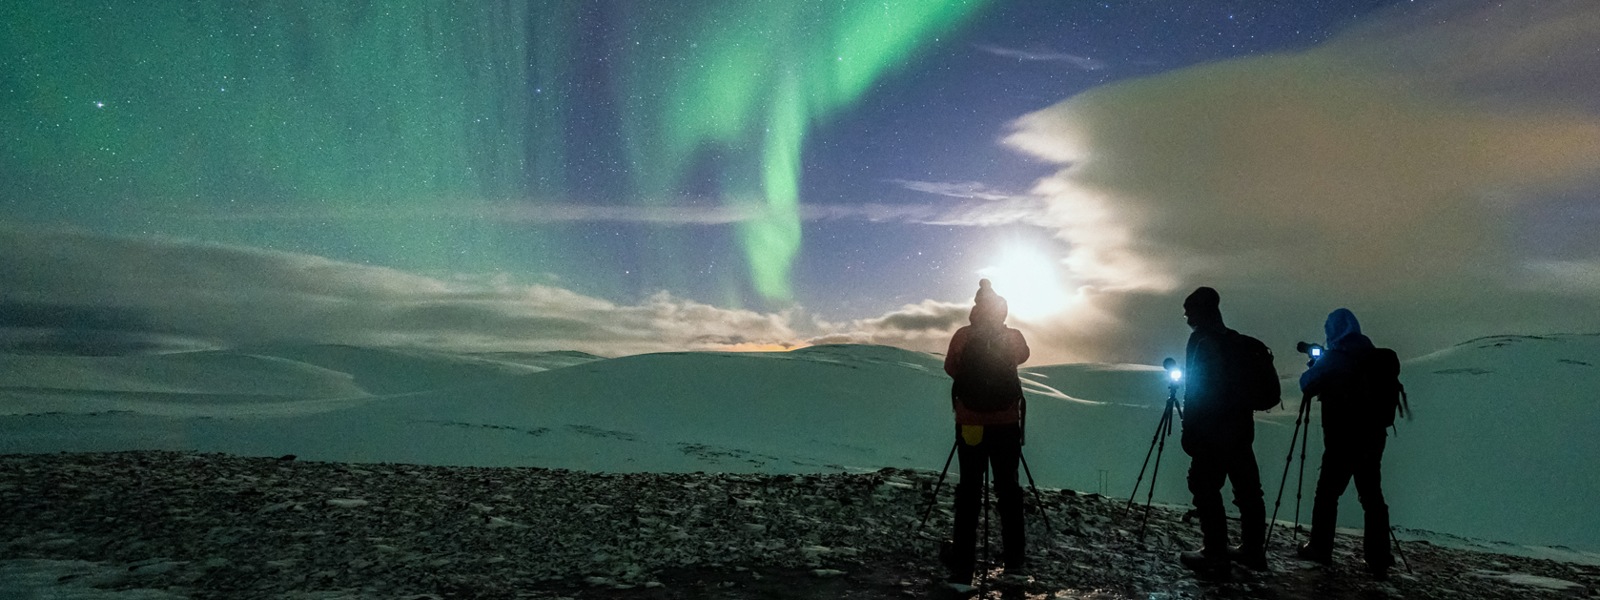 Three people with cameras photographing the northern lights on a cold winter night in Northern Norway.